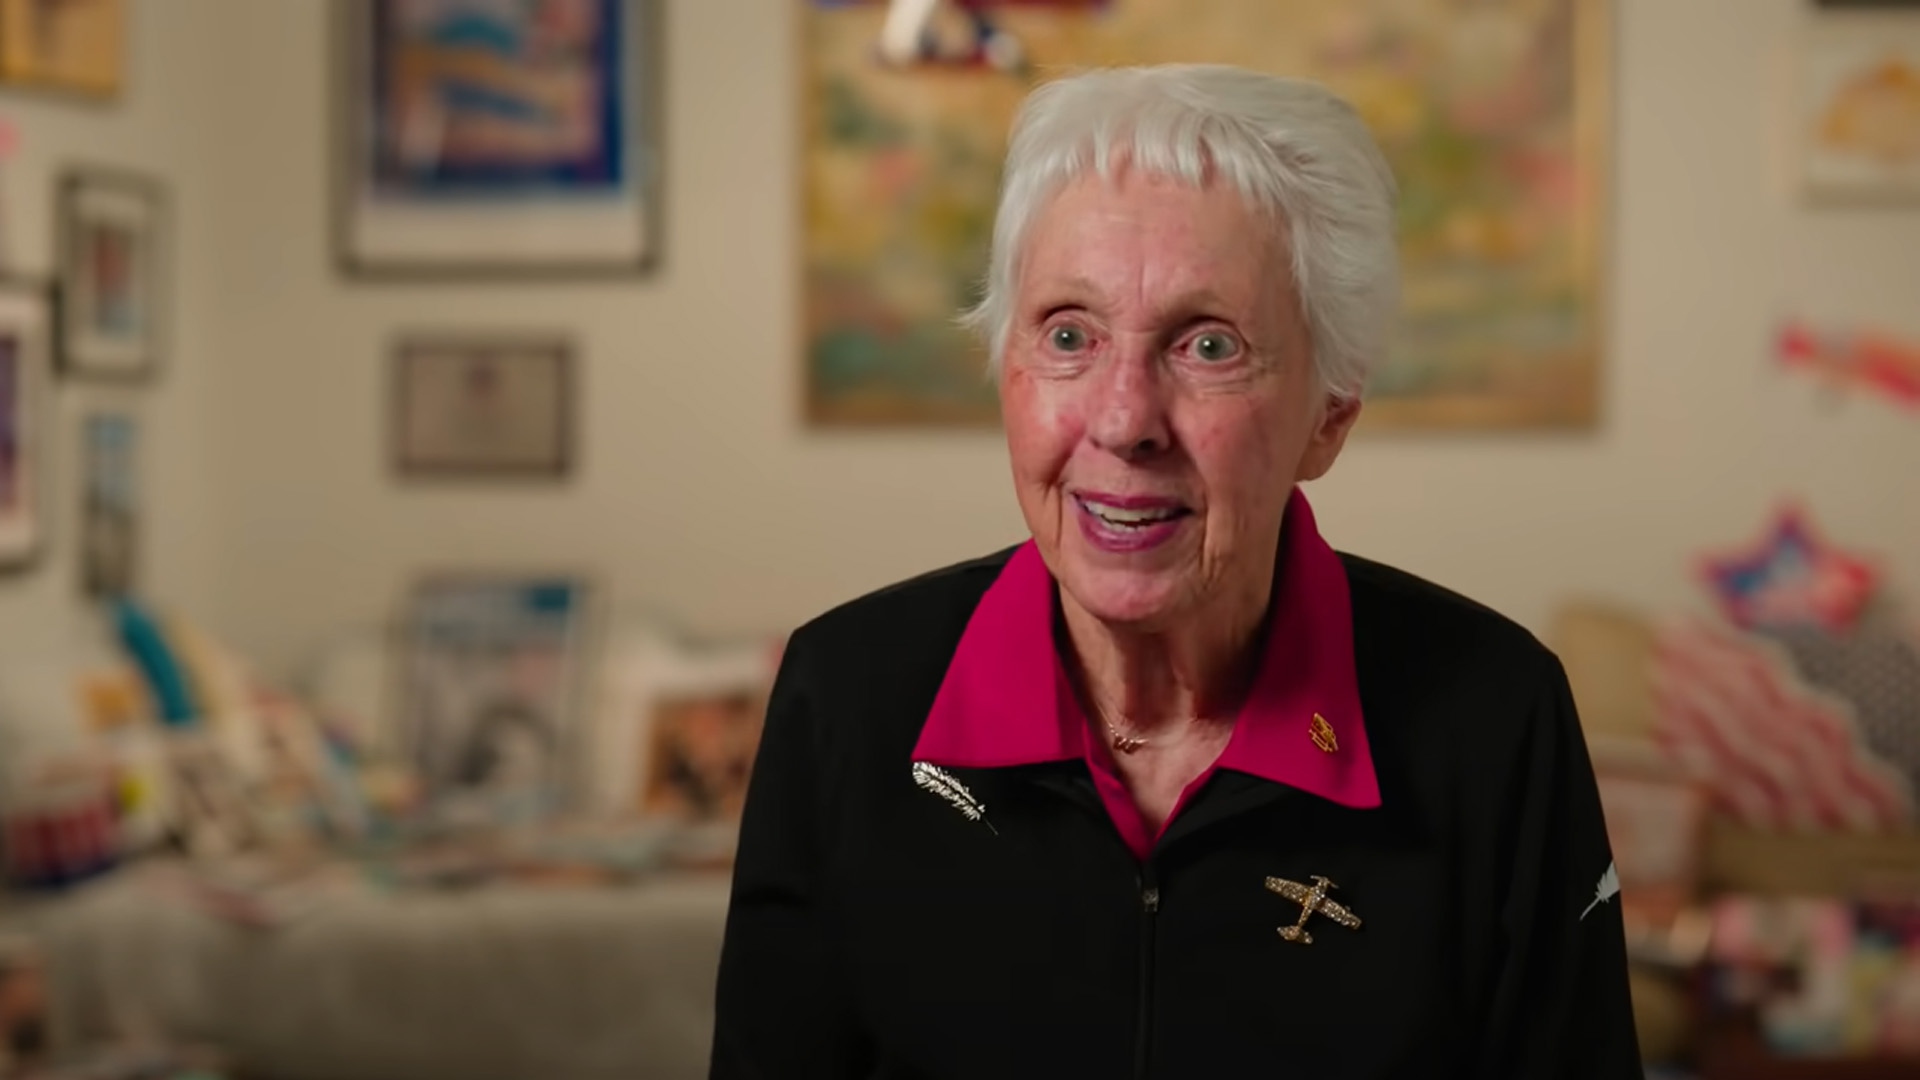 Wally Funk, 82, will become the oldest person to fly in space when she launches with Blue Origin on July 20, 2021.